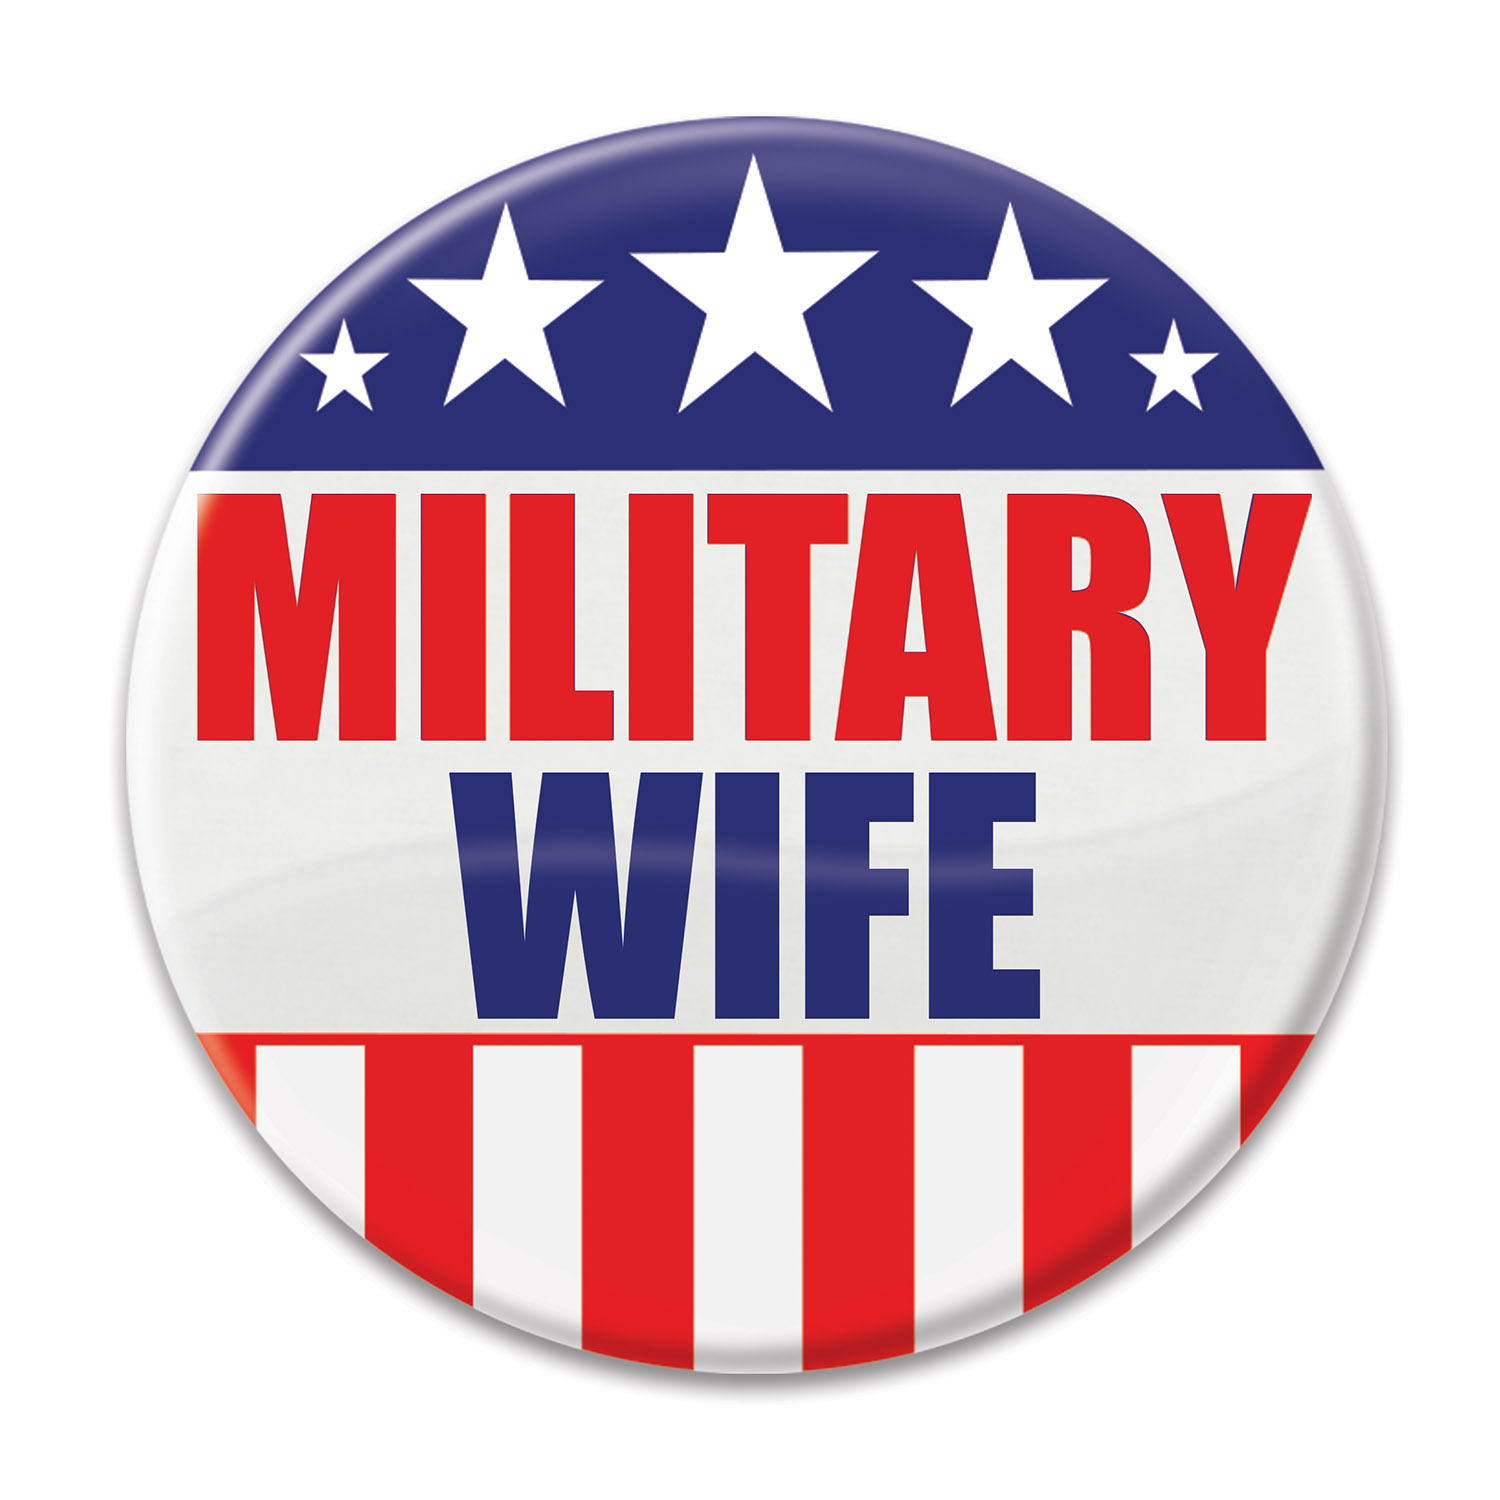 MILITARY WIFE BUTTON (6) image